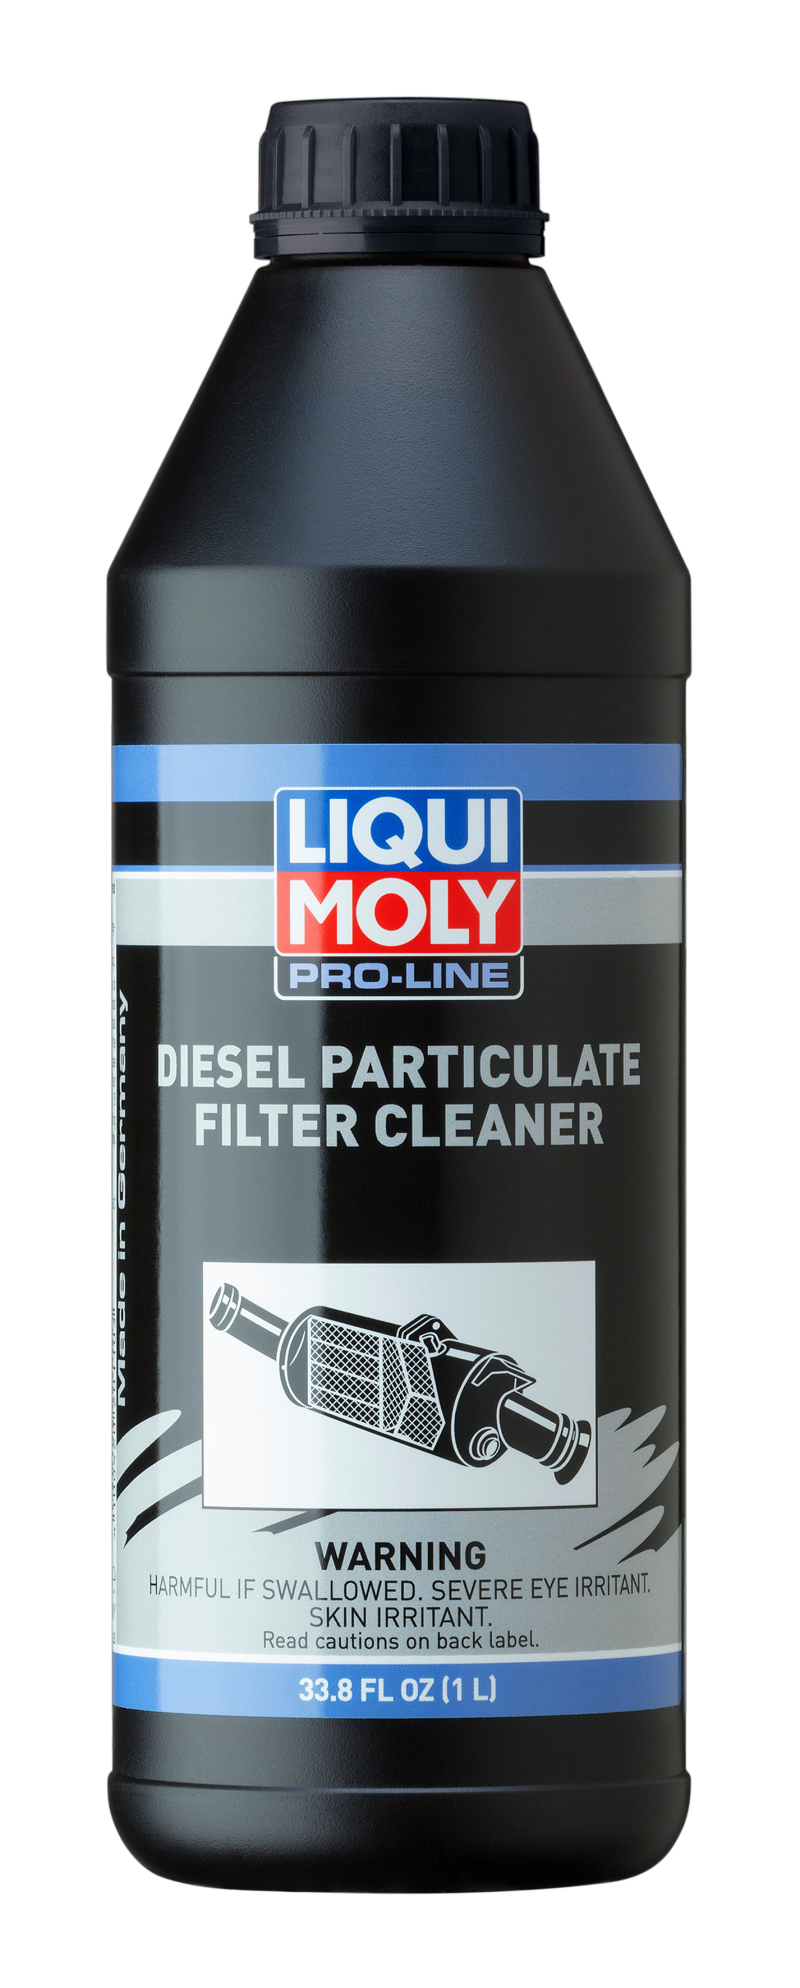 LIQUI MOLY 1L Pro-Line Diesel Particulate Filter Cleaner - 20110